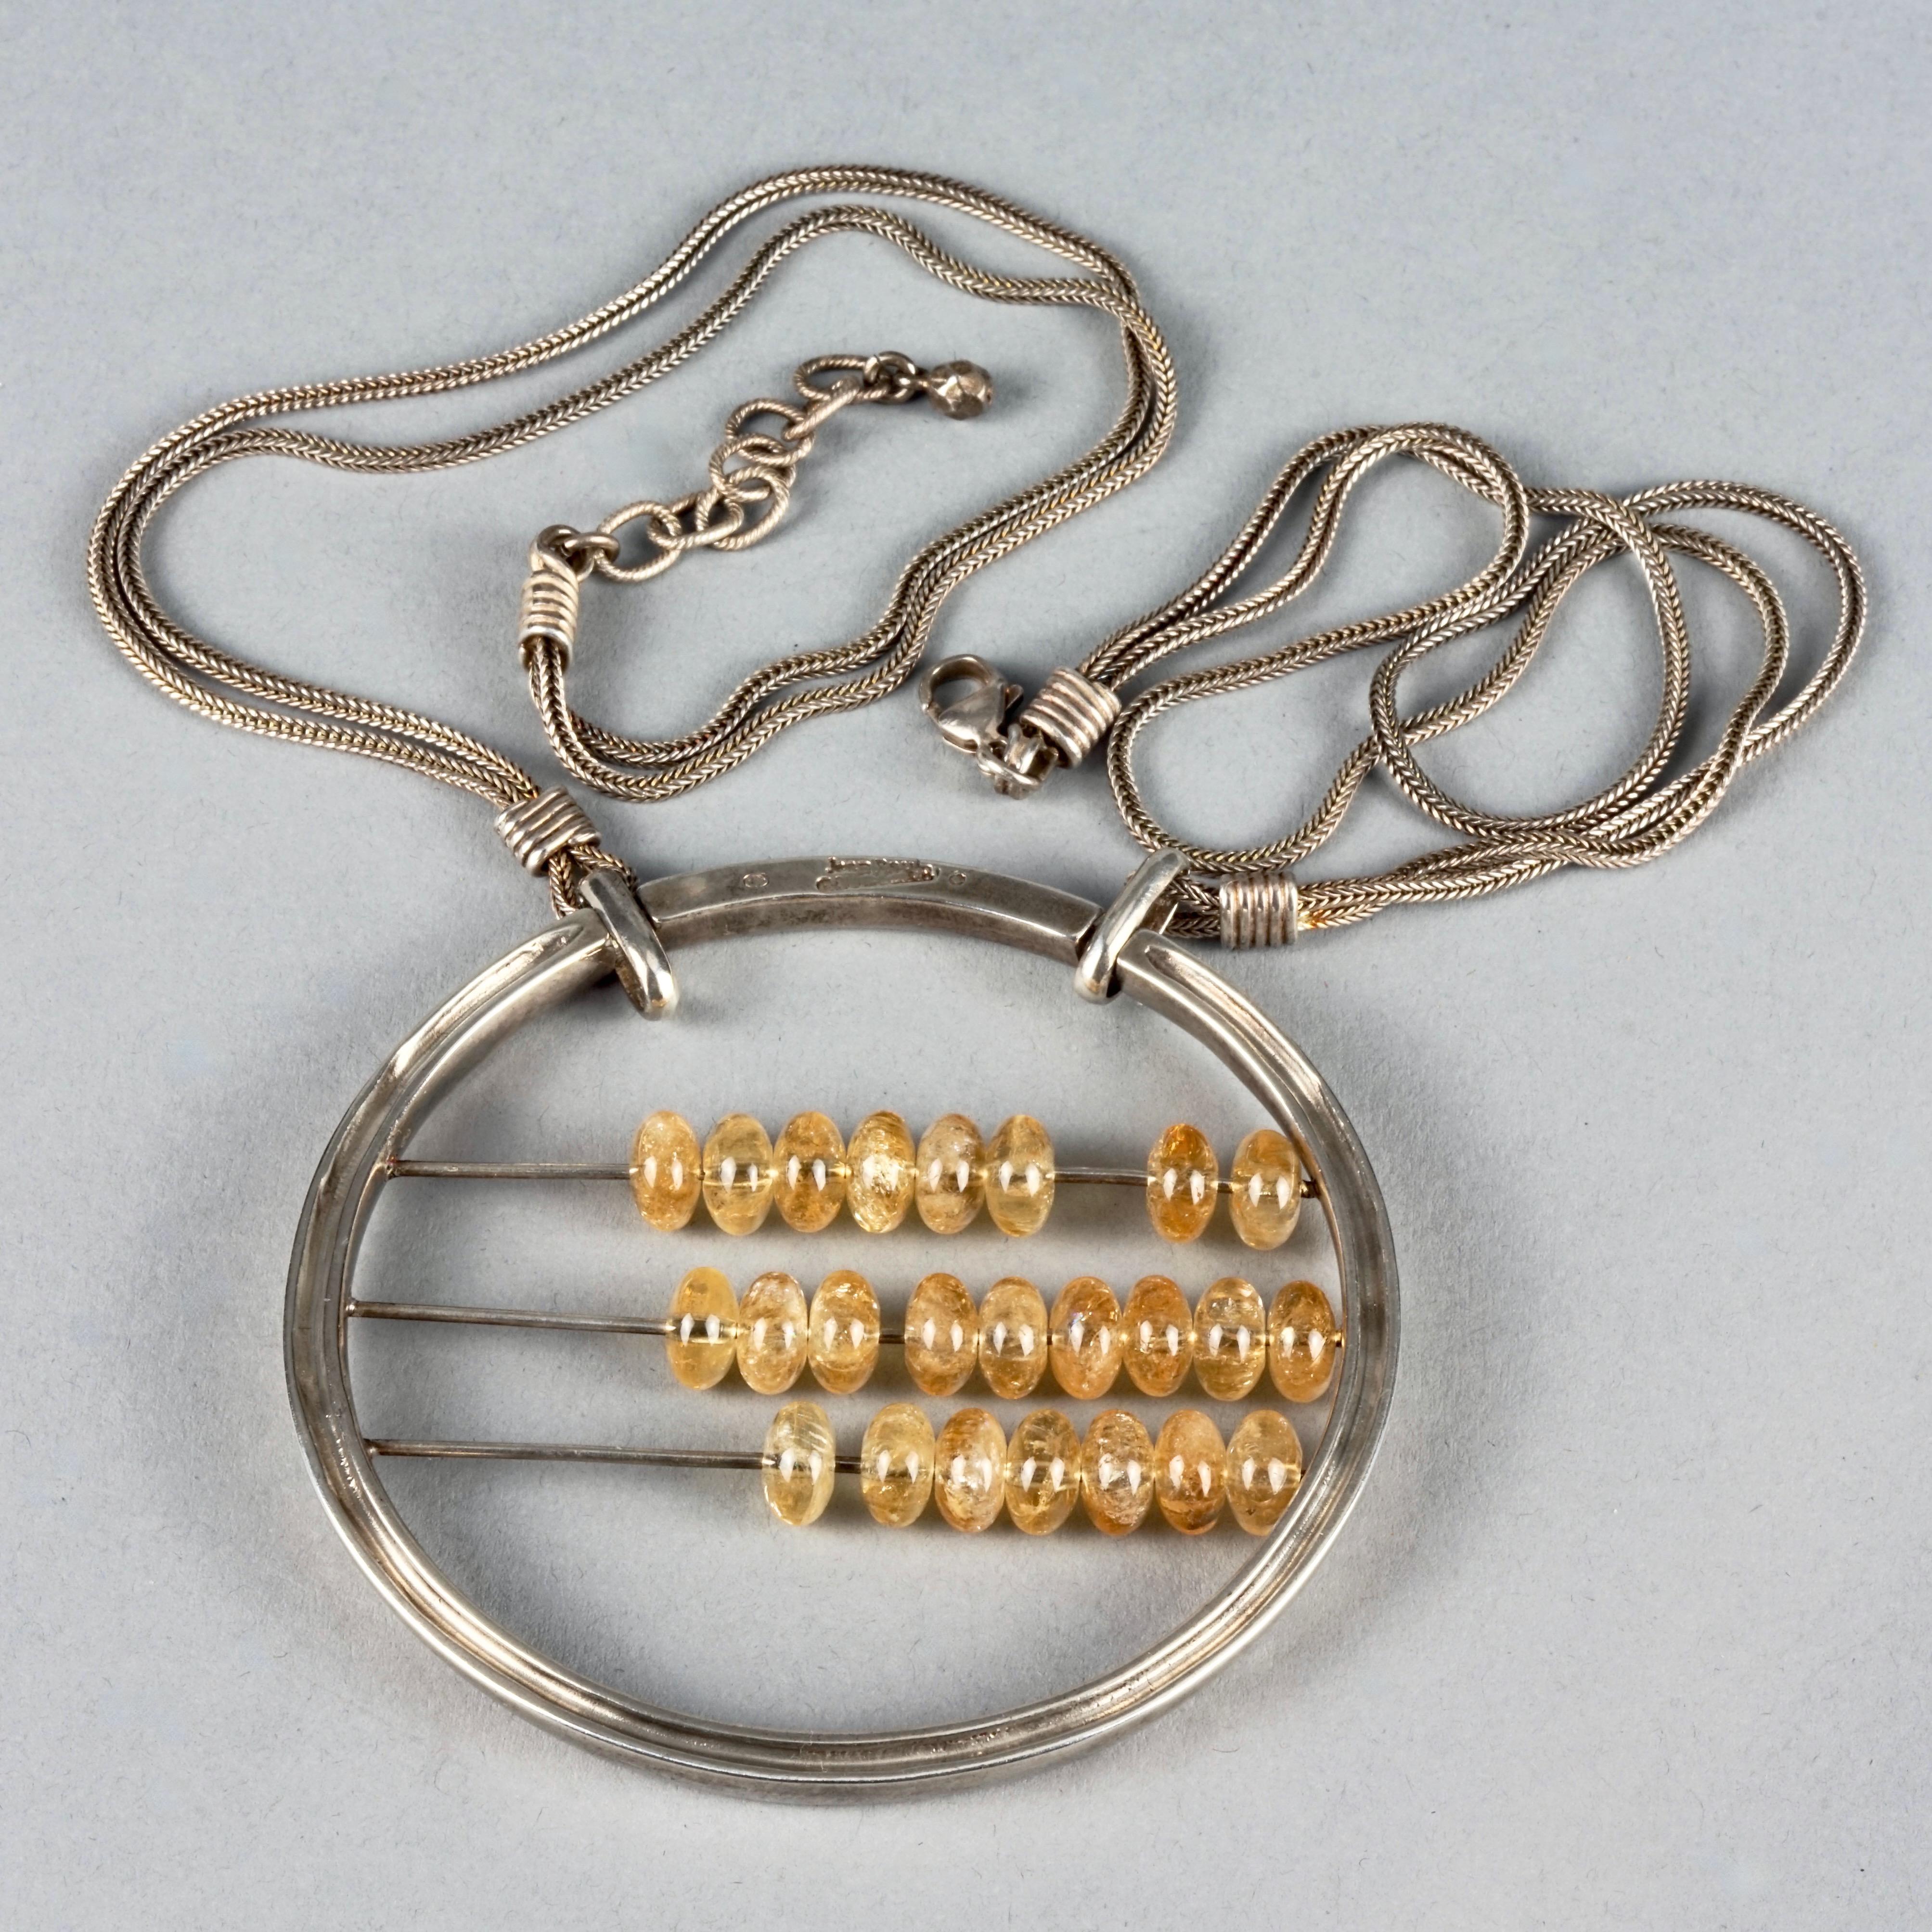 Vintage JEAN PAUL GAULTIER Abacus Medallion Sterling Silver Necklace In Excellent Condition For Sale In Kingersheim, Alsace